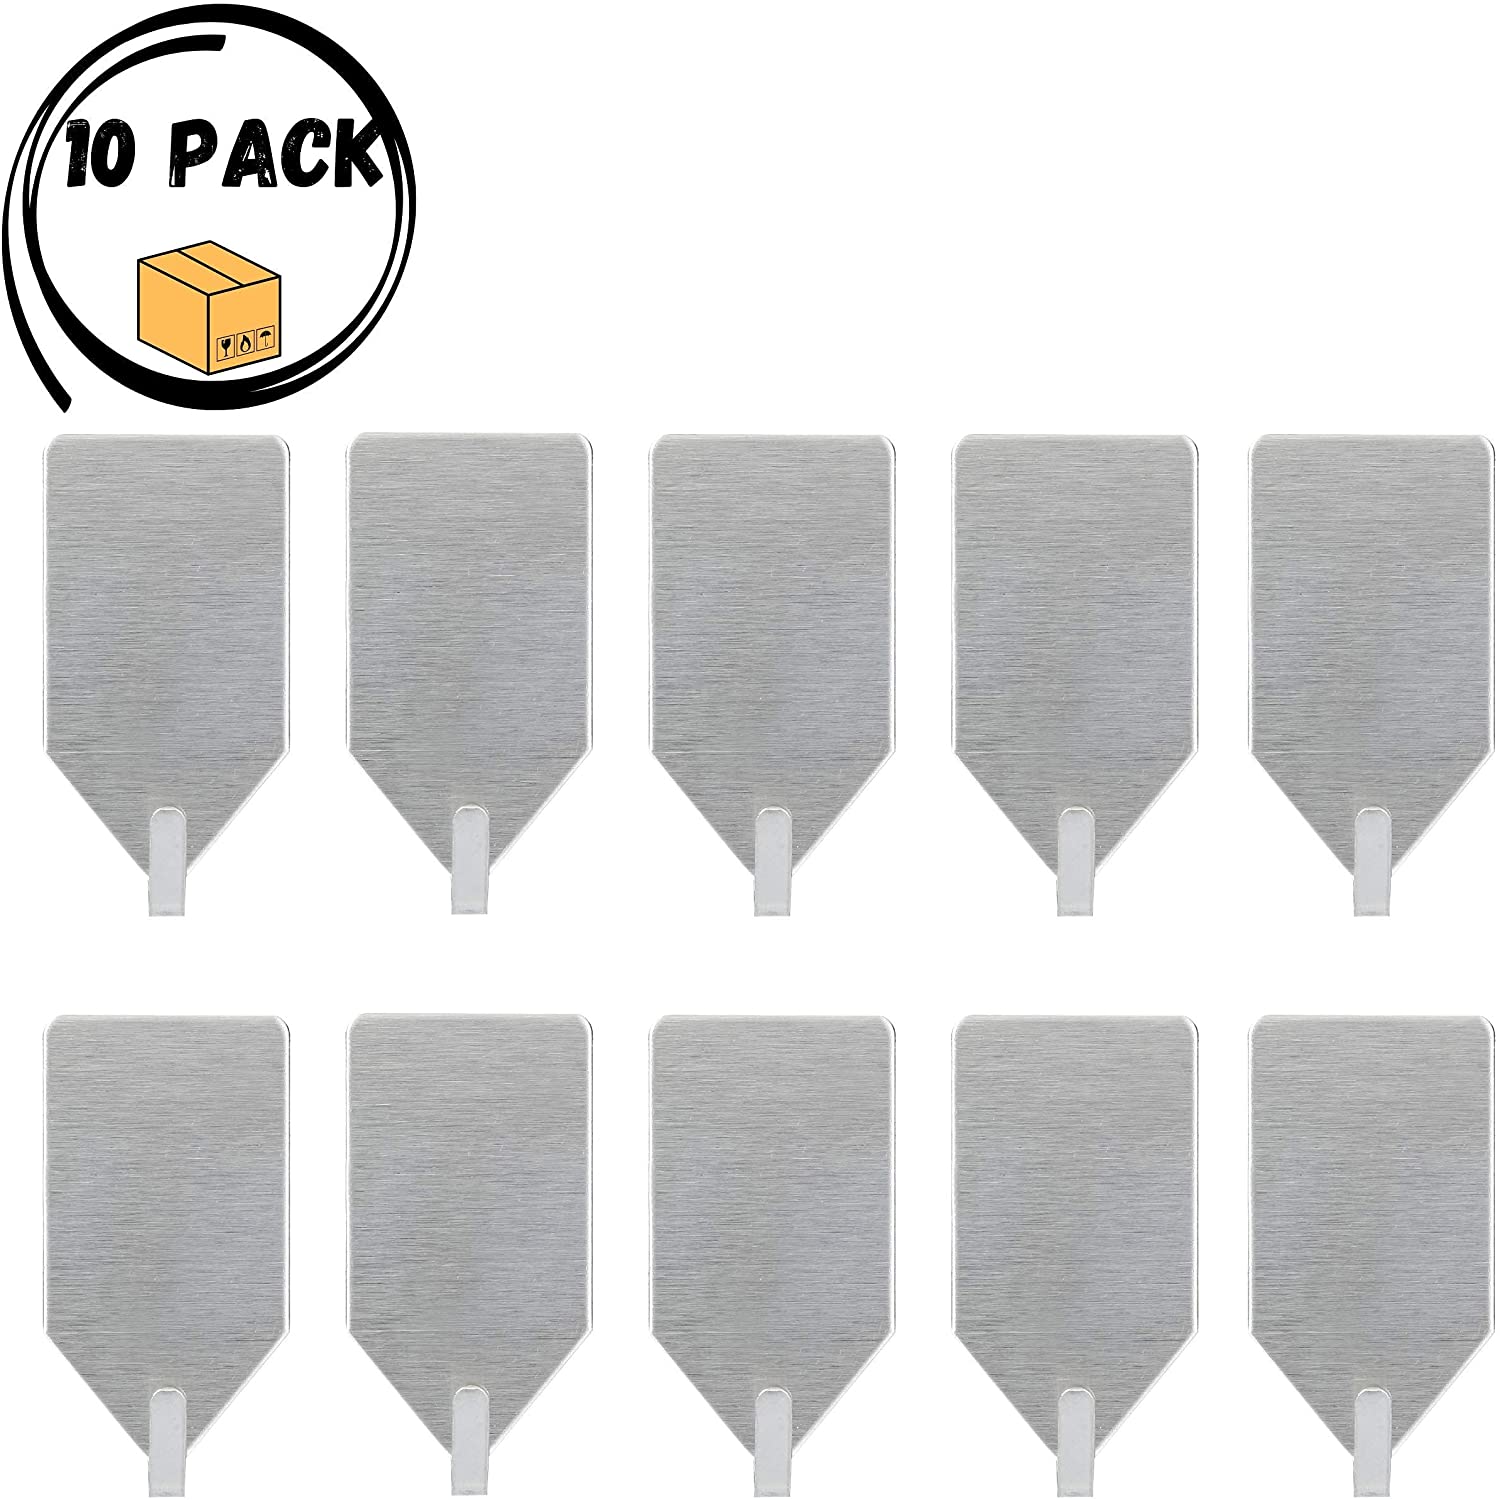 UNCO- Metal Small Adhesive Hooks, 10 Pack, Stainless Steel, Hooks for  Hanging Towels, Adhesive Wall Hooks, Stick on Hooks, Self Adhesive Hooks